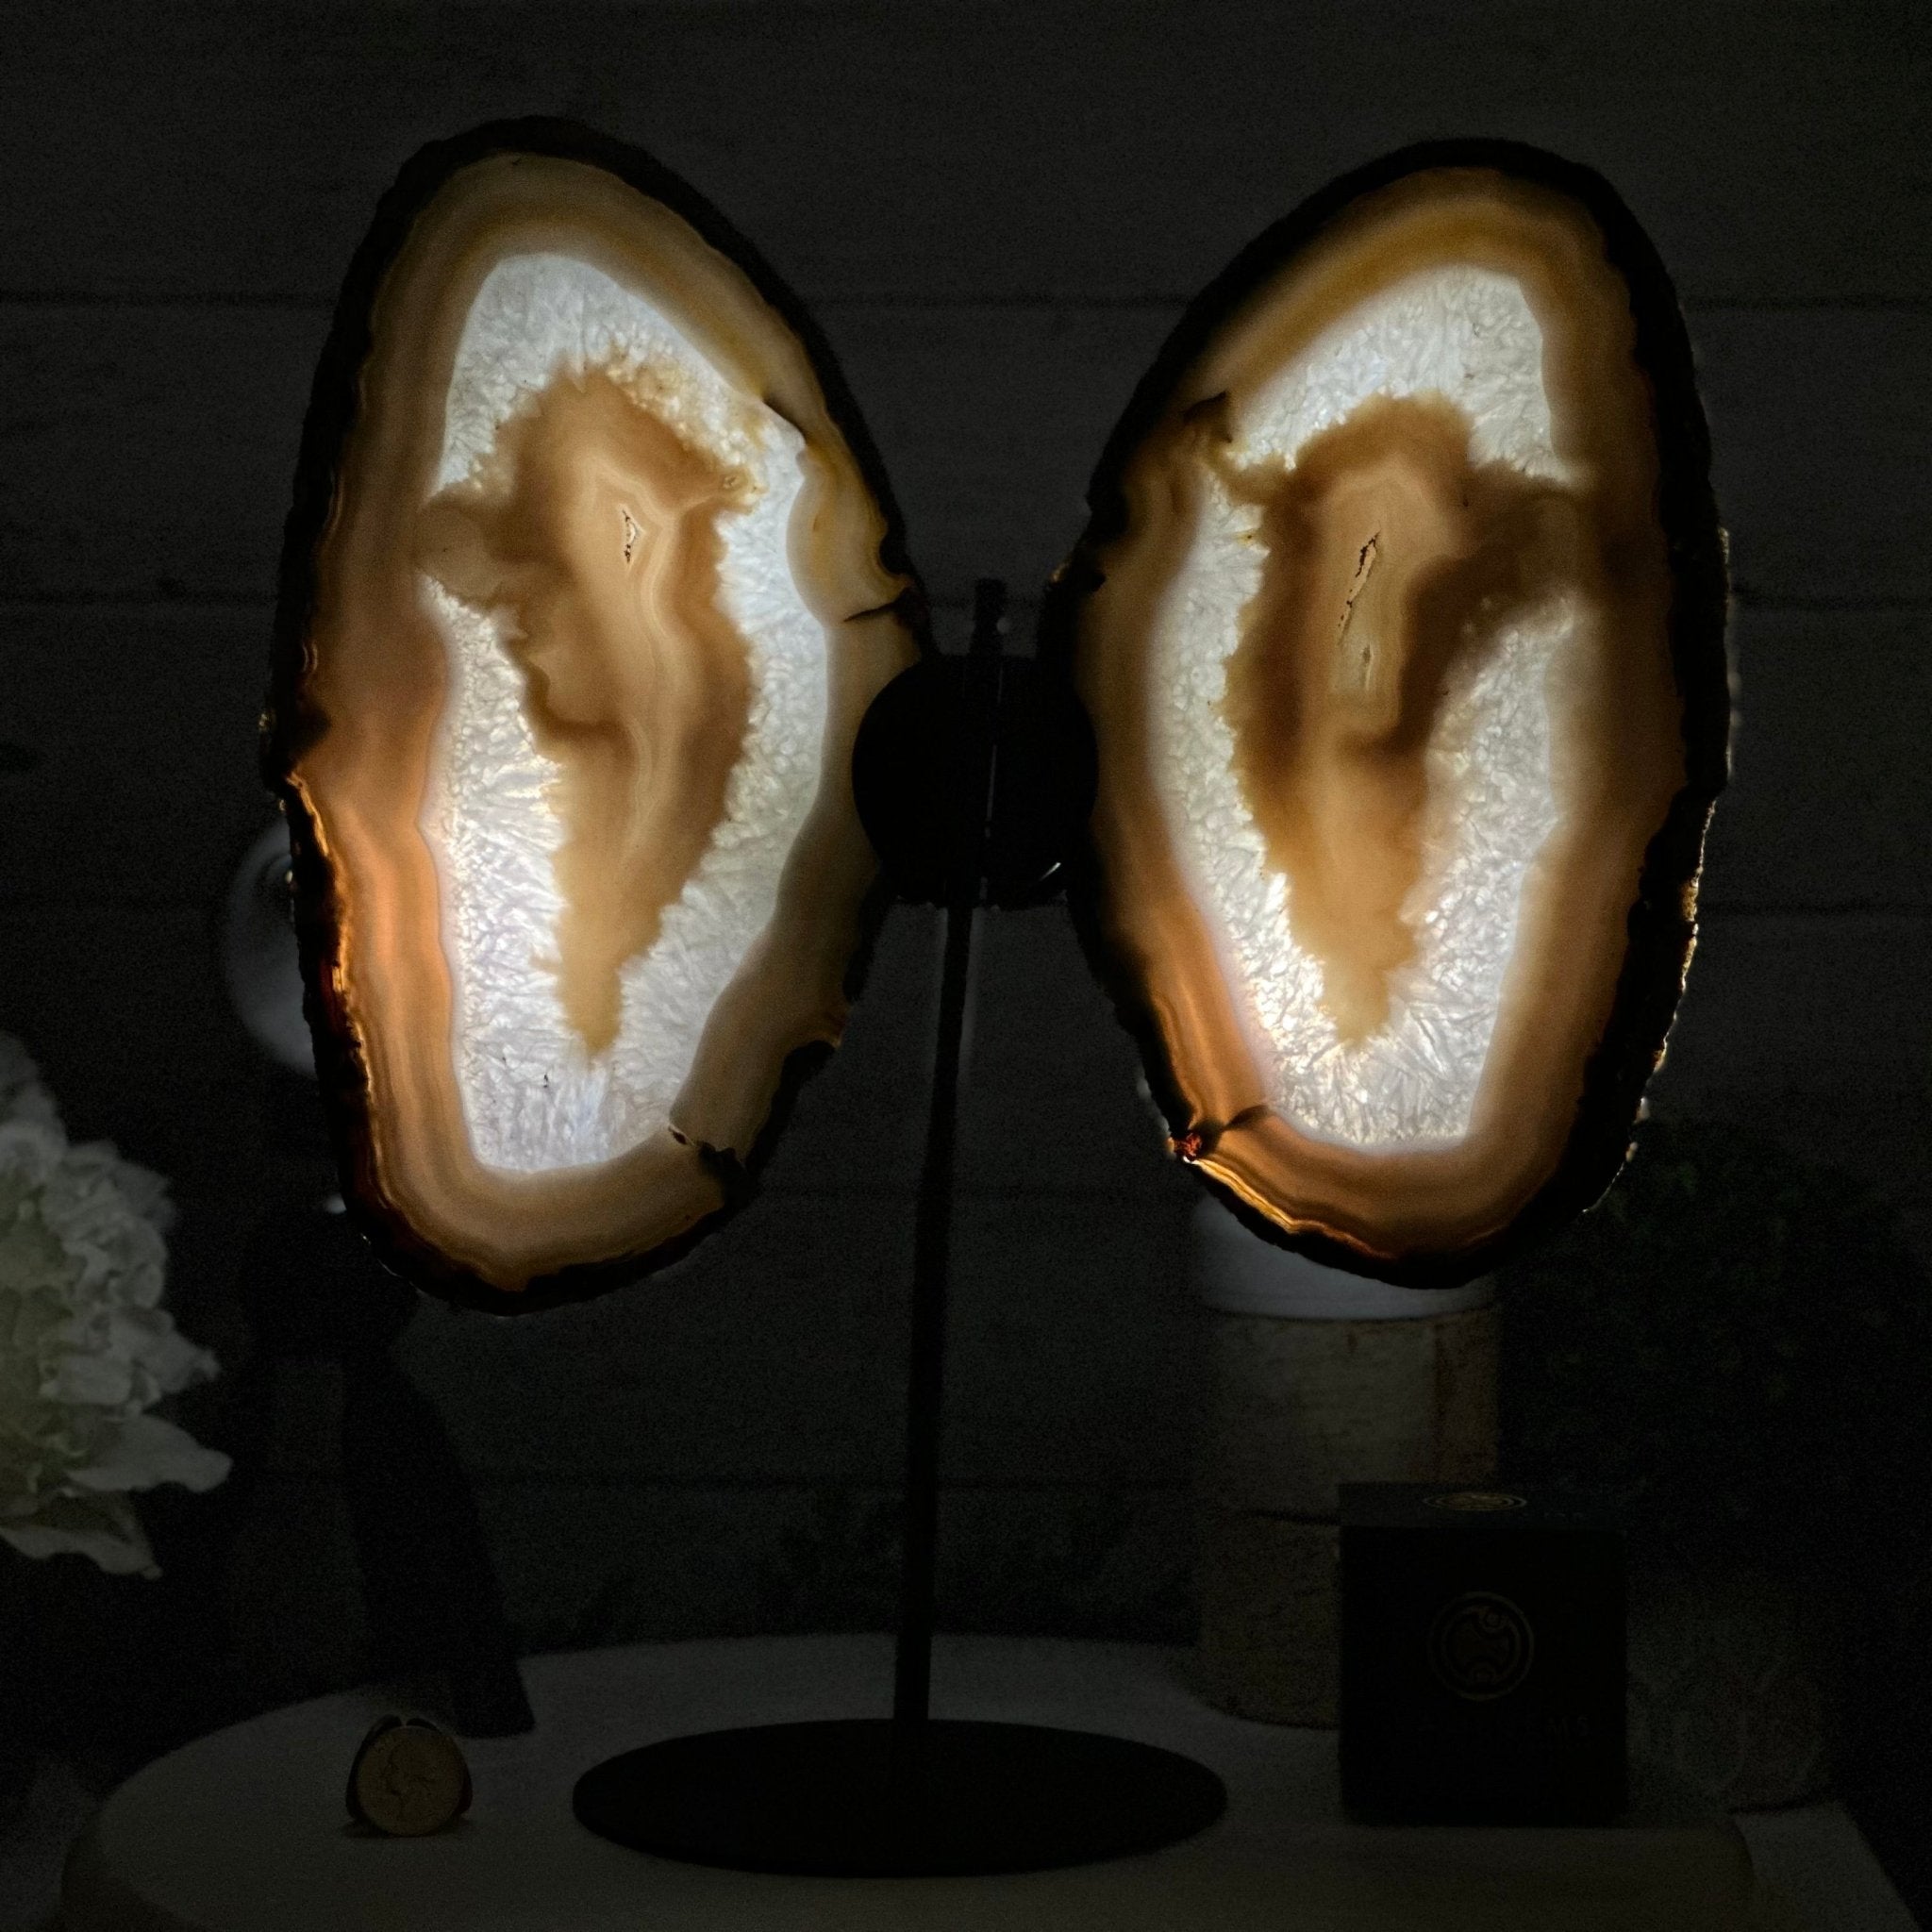 Natural Brazilian Agate "Butterfly Wings", 15.4" Tall #5050NA-100 - Brazil GemsBrazil GemsNatural Brazilian Agate "Butterfly Wings", 15.4" Tall #5050NA-100Agate Butterfly Wings5050NA-100